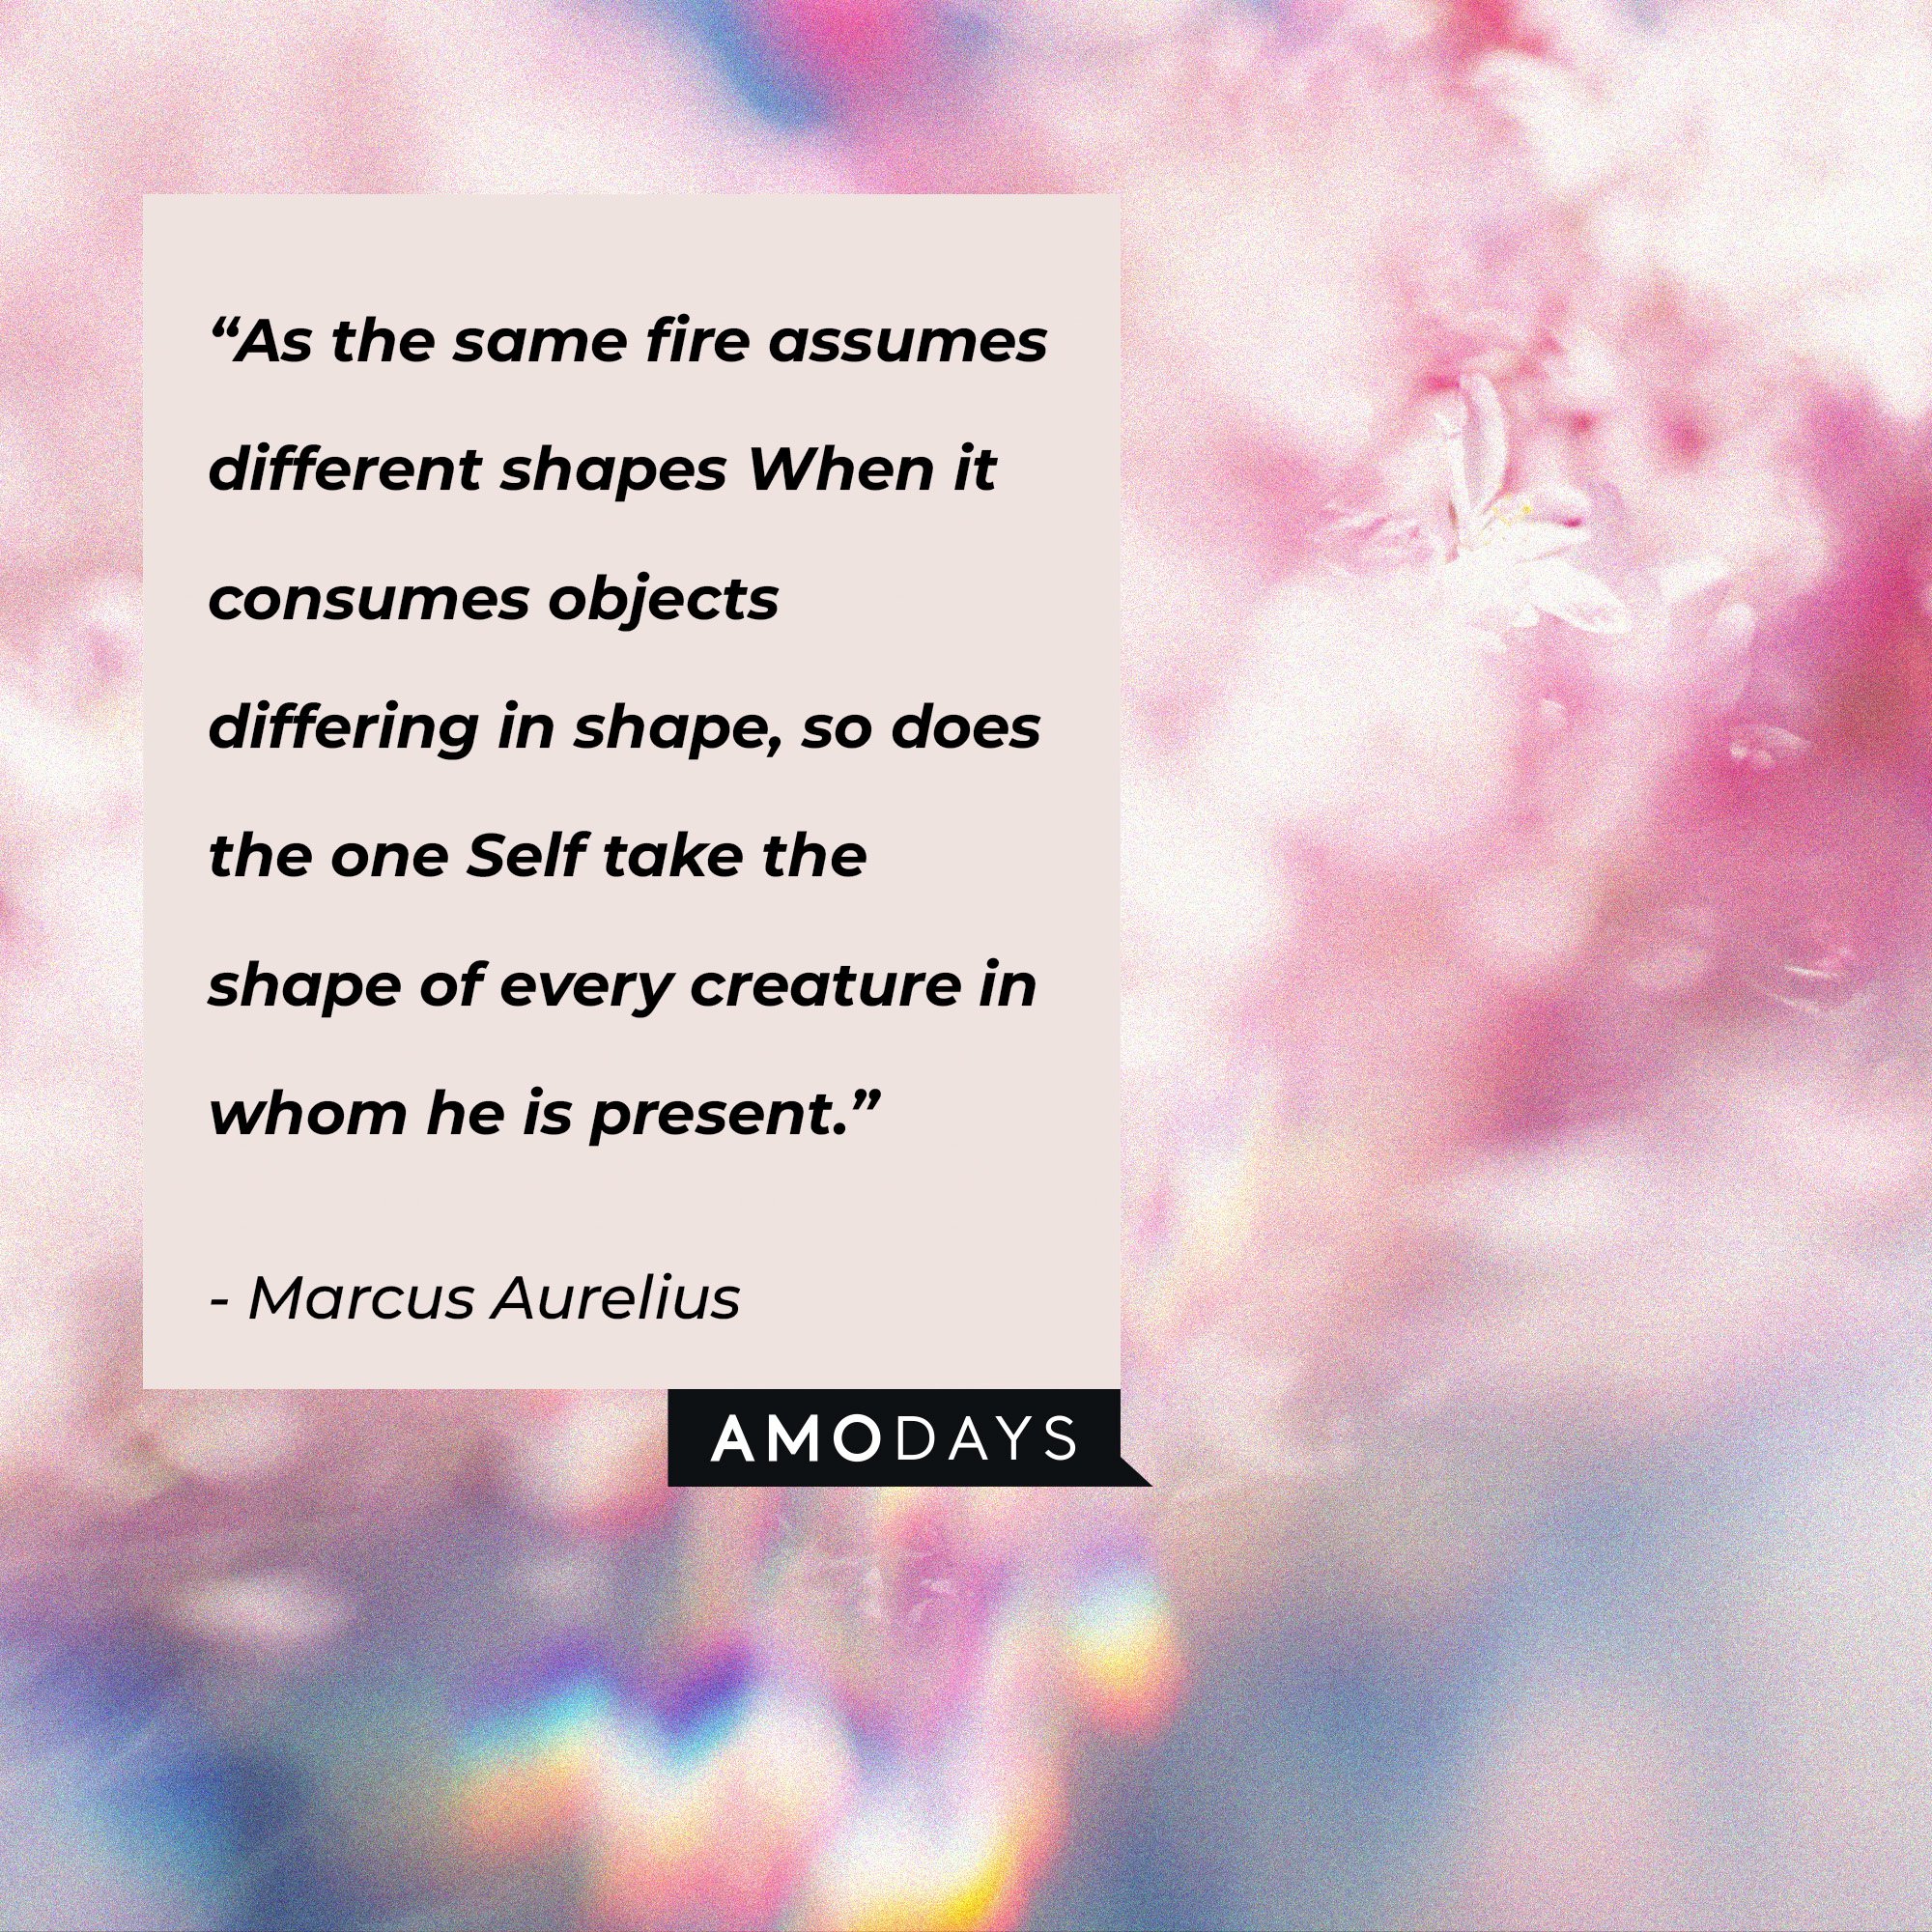 Marcus Aurelius's quote:  “As the same fire assumes different shapes When it consumes objects differing in shape, so does the one Self take the shape of every creature in whom he is present.” | Image: Amodays